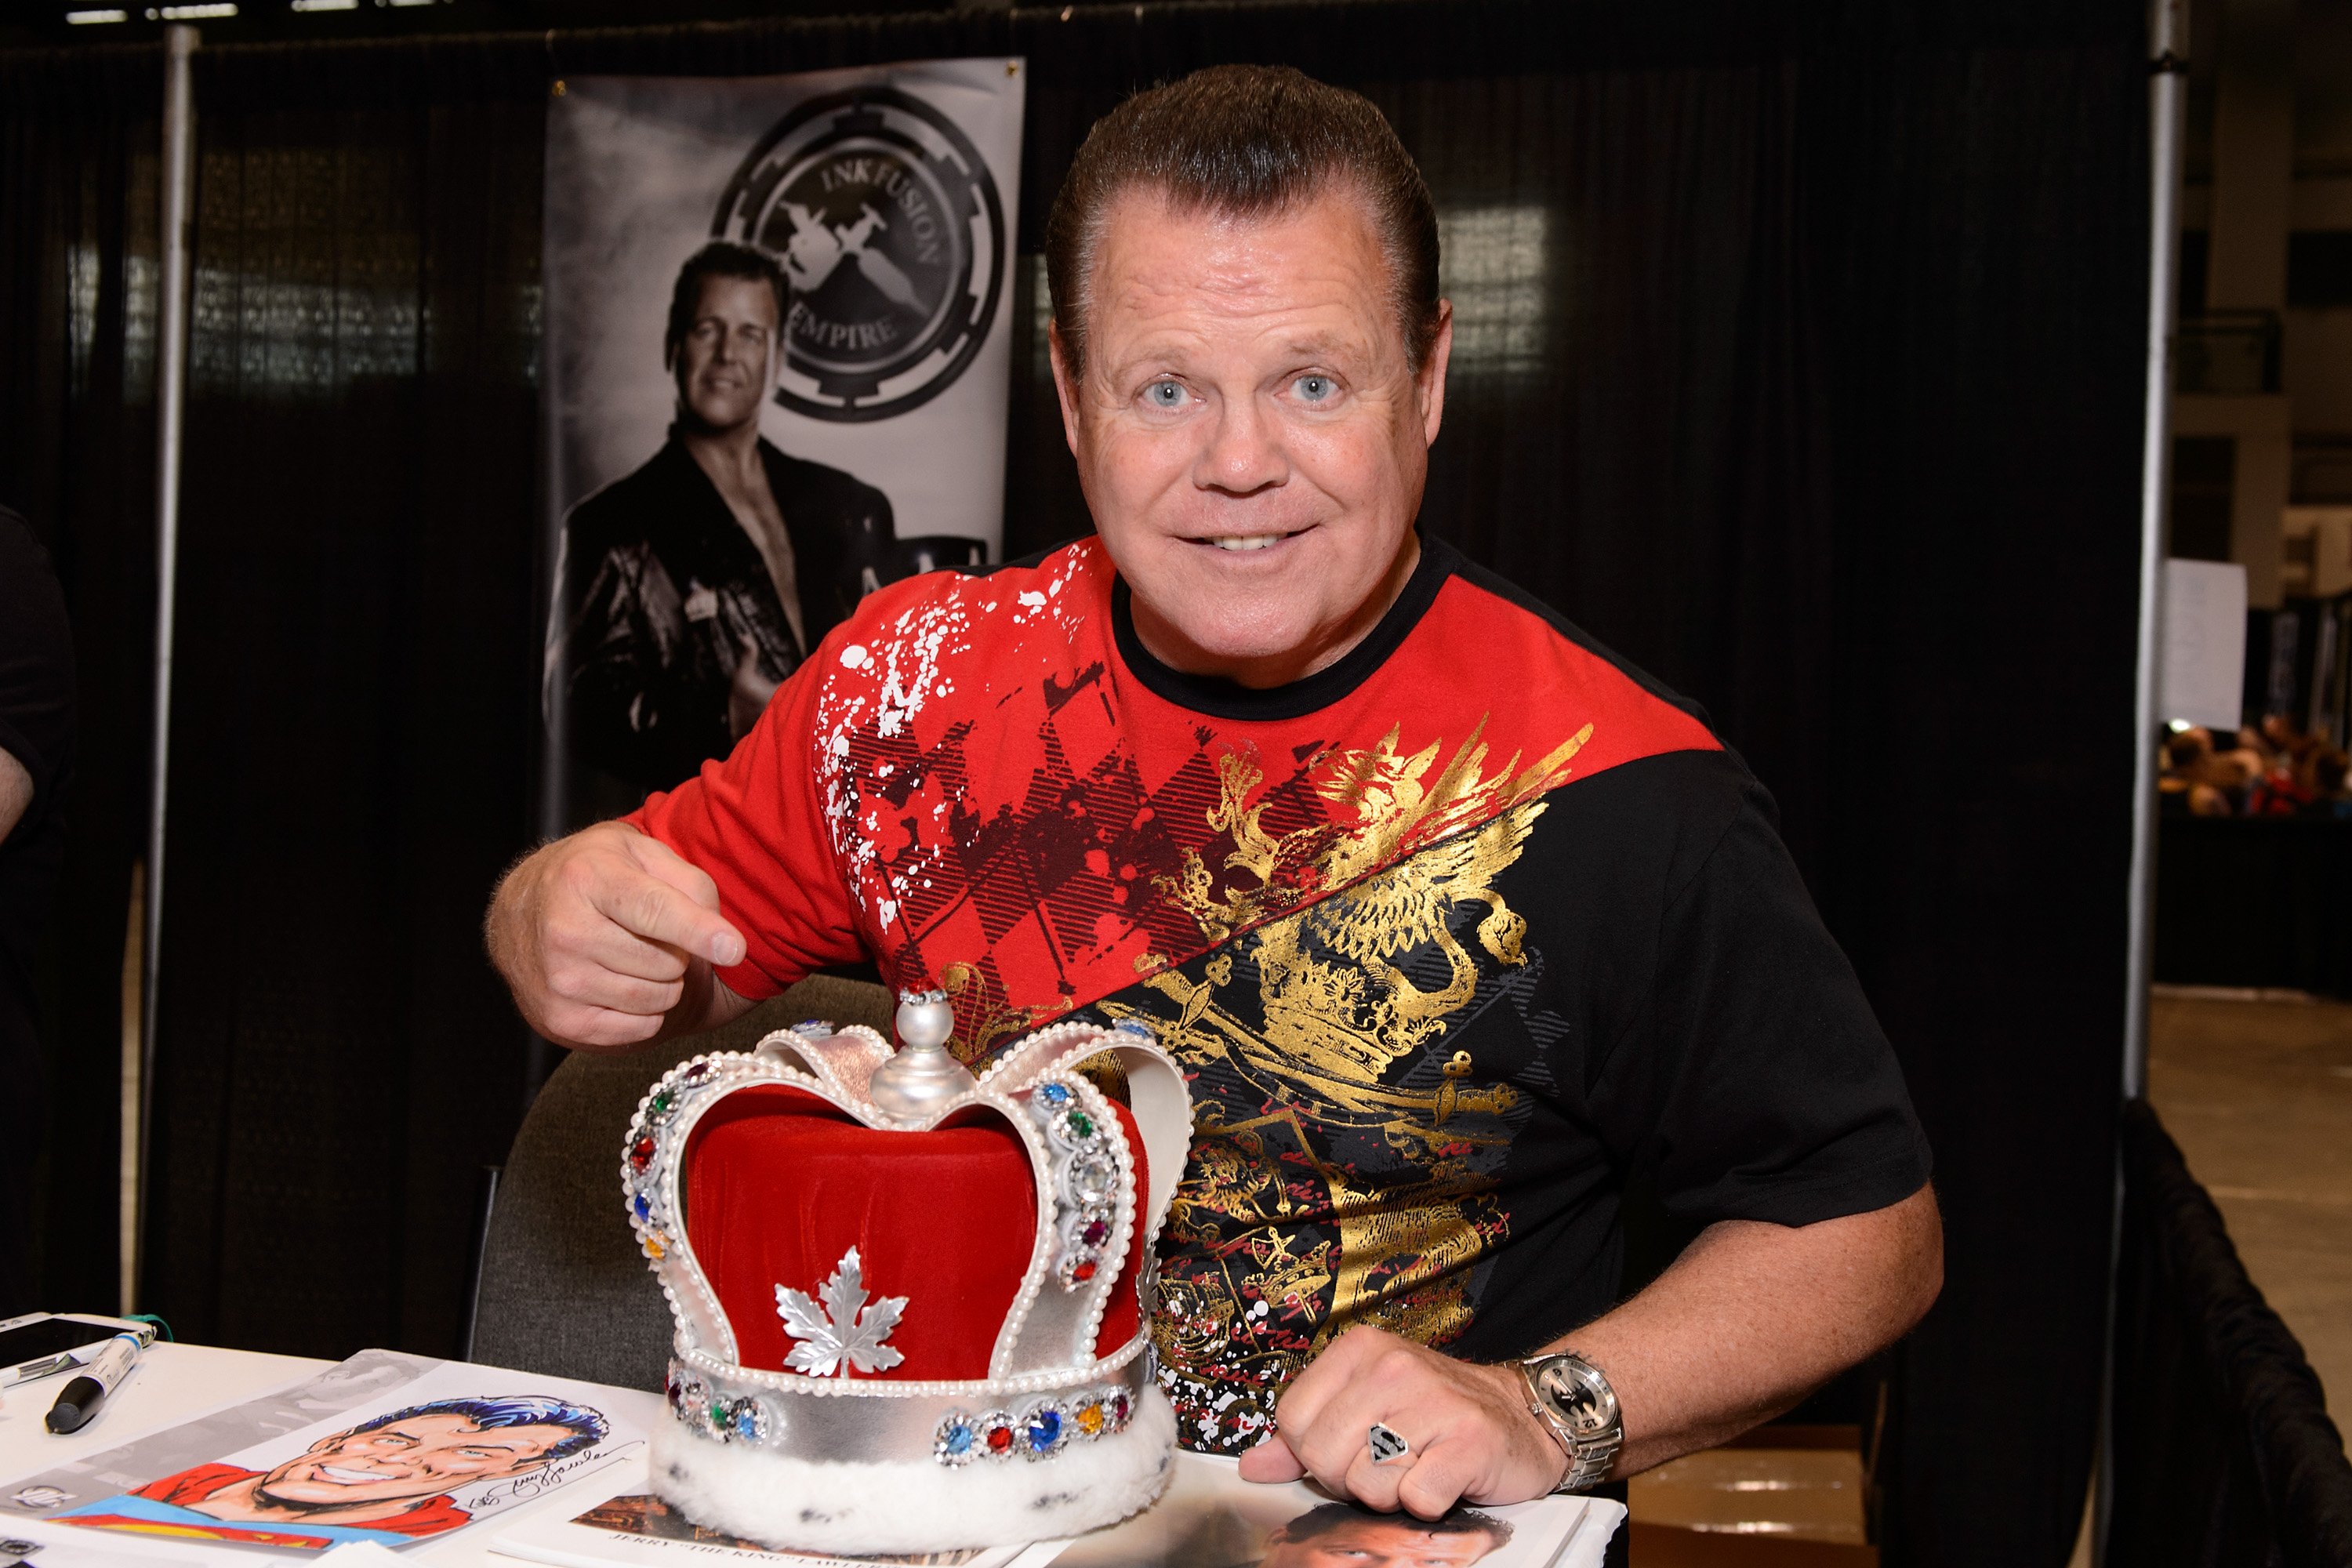 Jerry "The King" Lawler at McCormick Place on April 24, 2015, in Chicago, Illinois. | Source: Getty Images